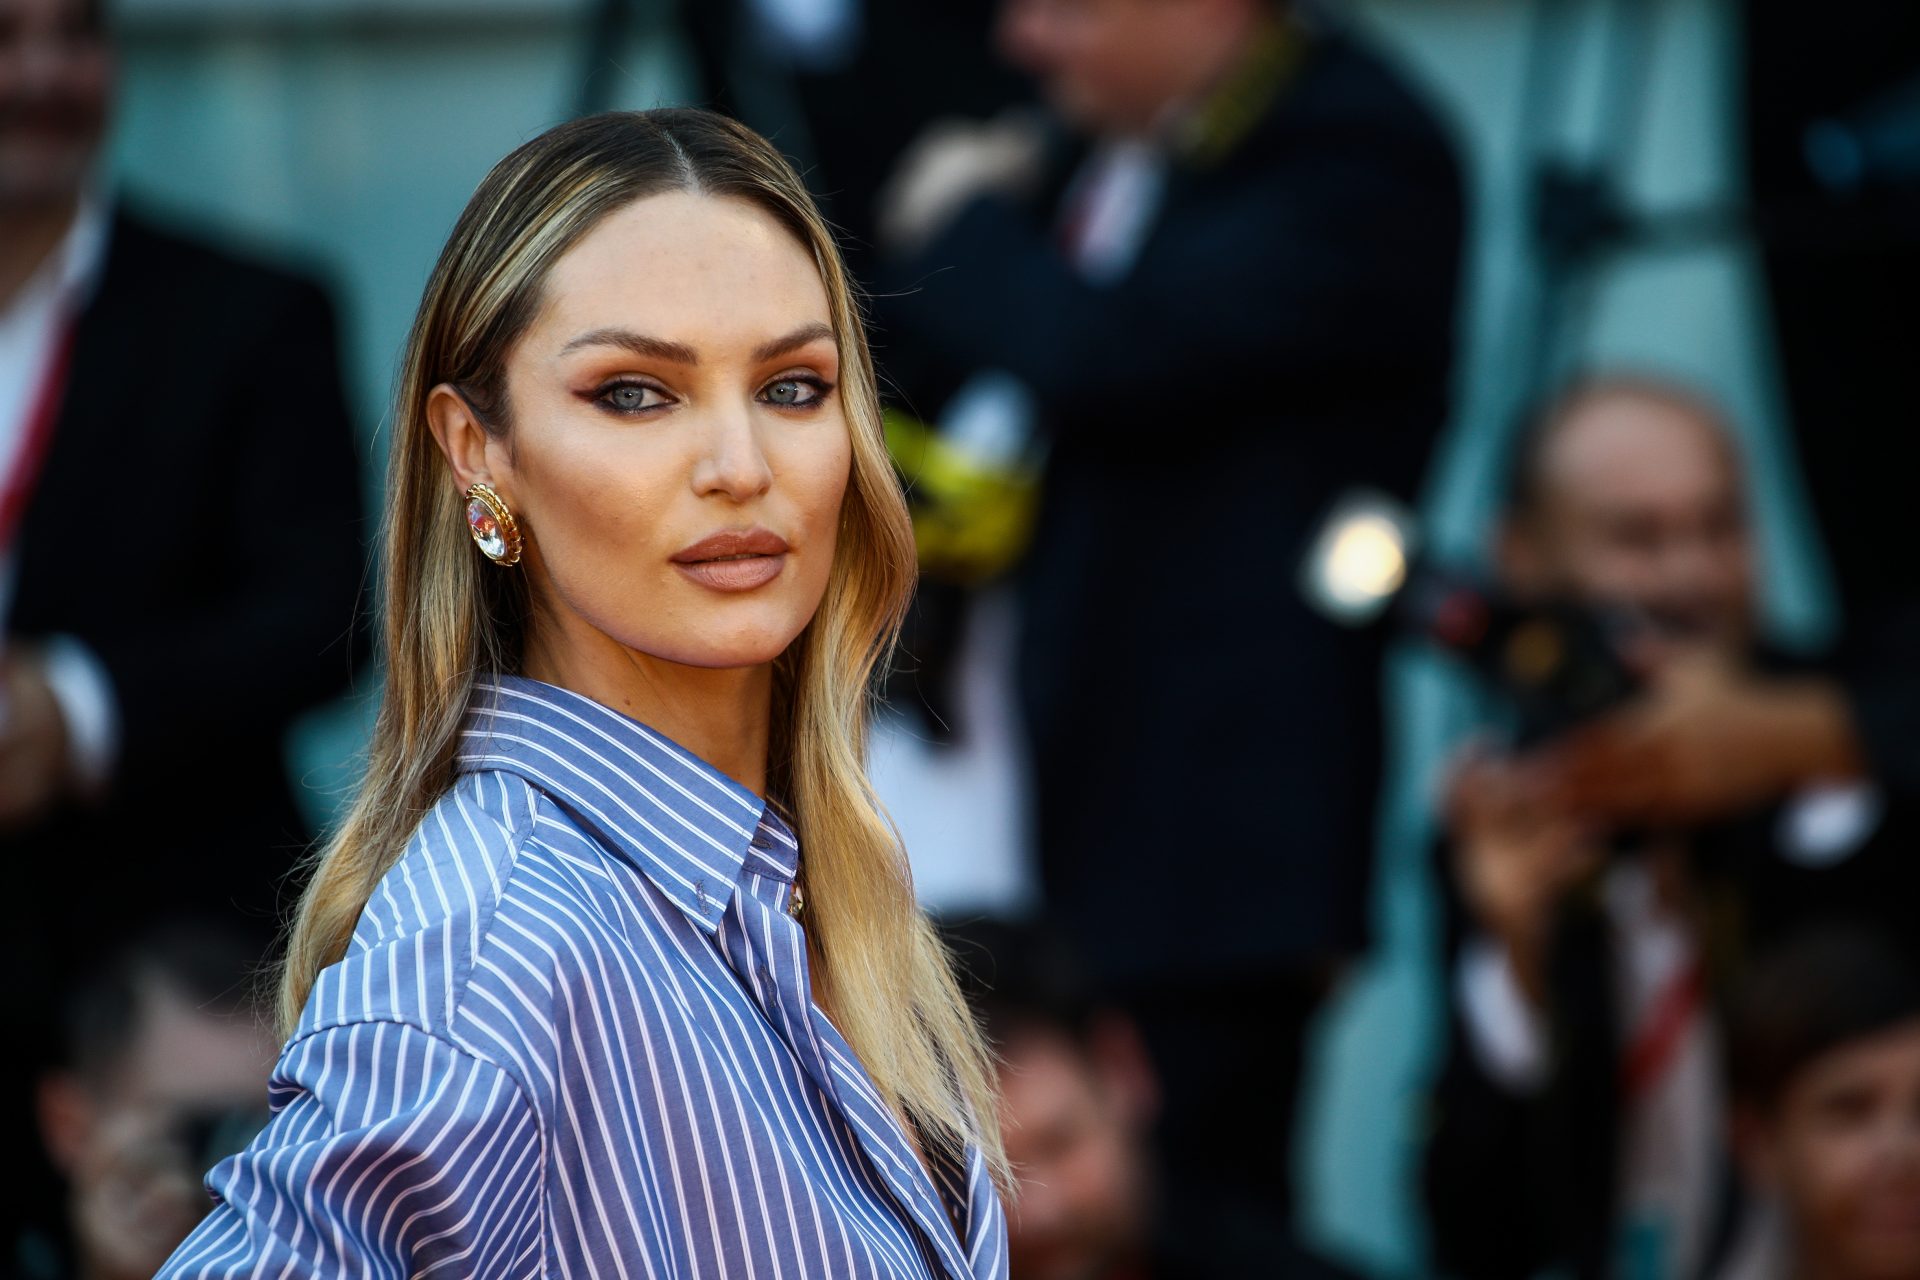 <p>Candice Swanepoel, a South African top model, has become one of Victoria's Secret's most iconic faces, like several others on this list.</p> <p>Net worth: $25 million</p>